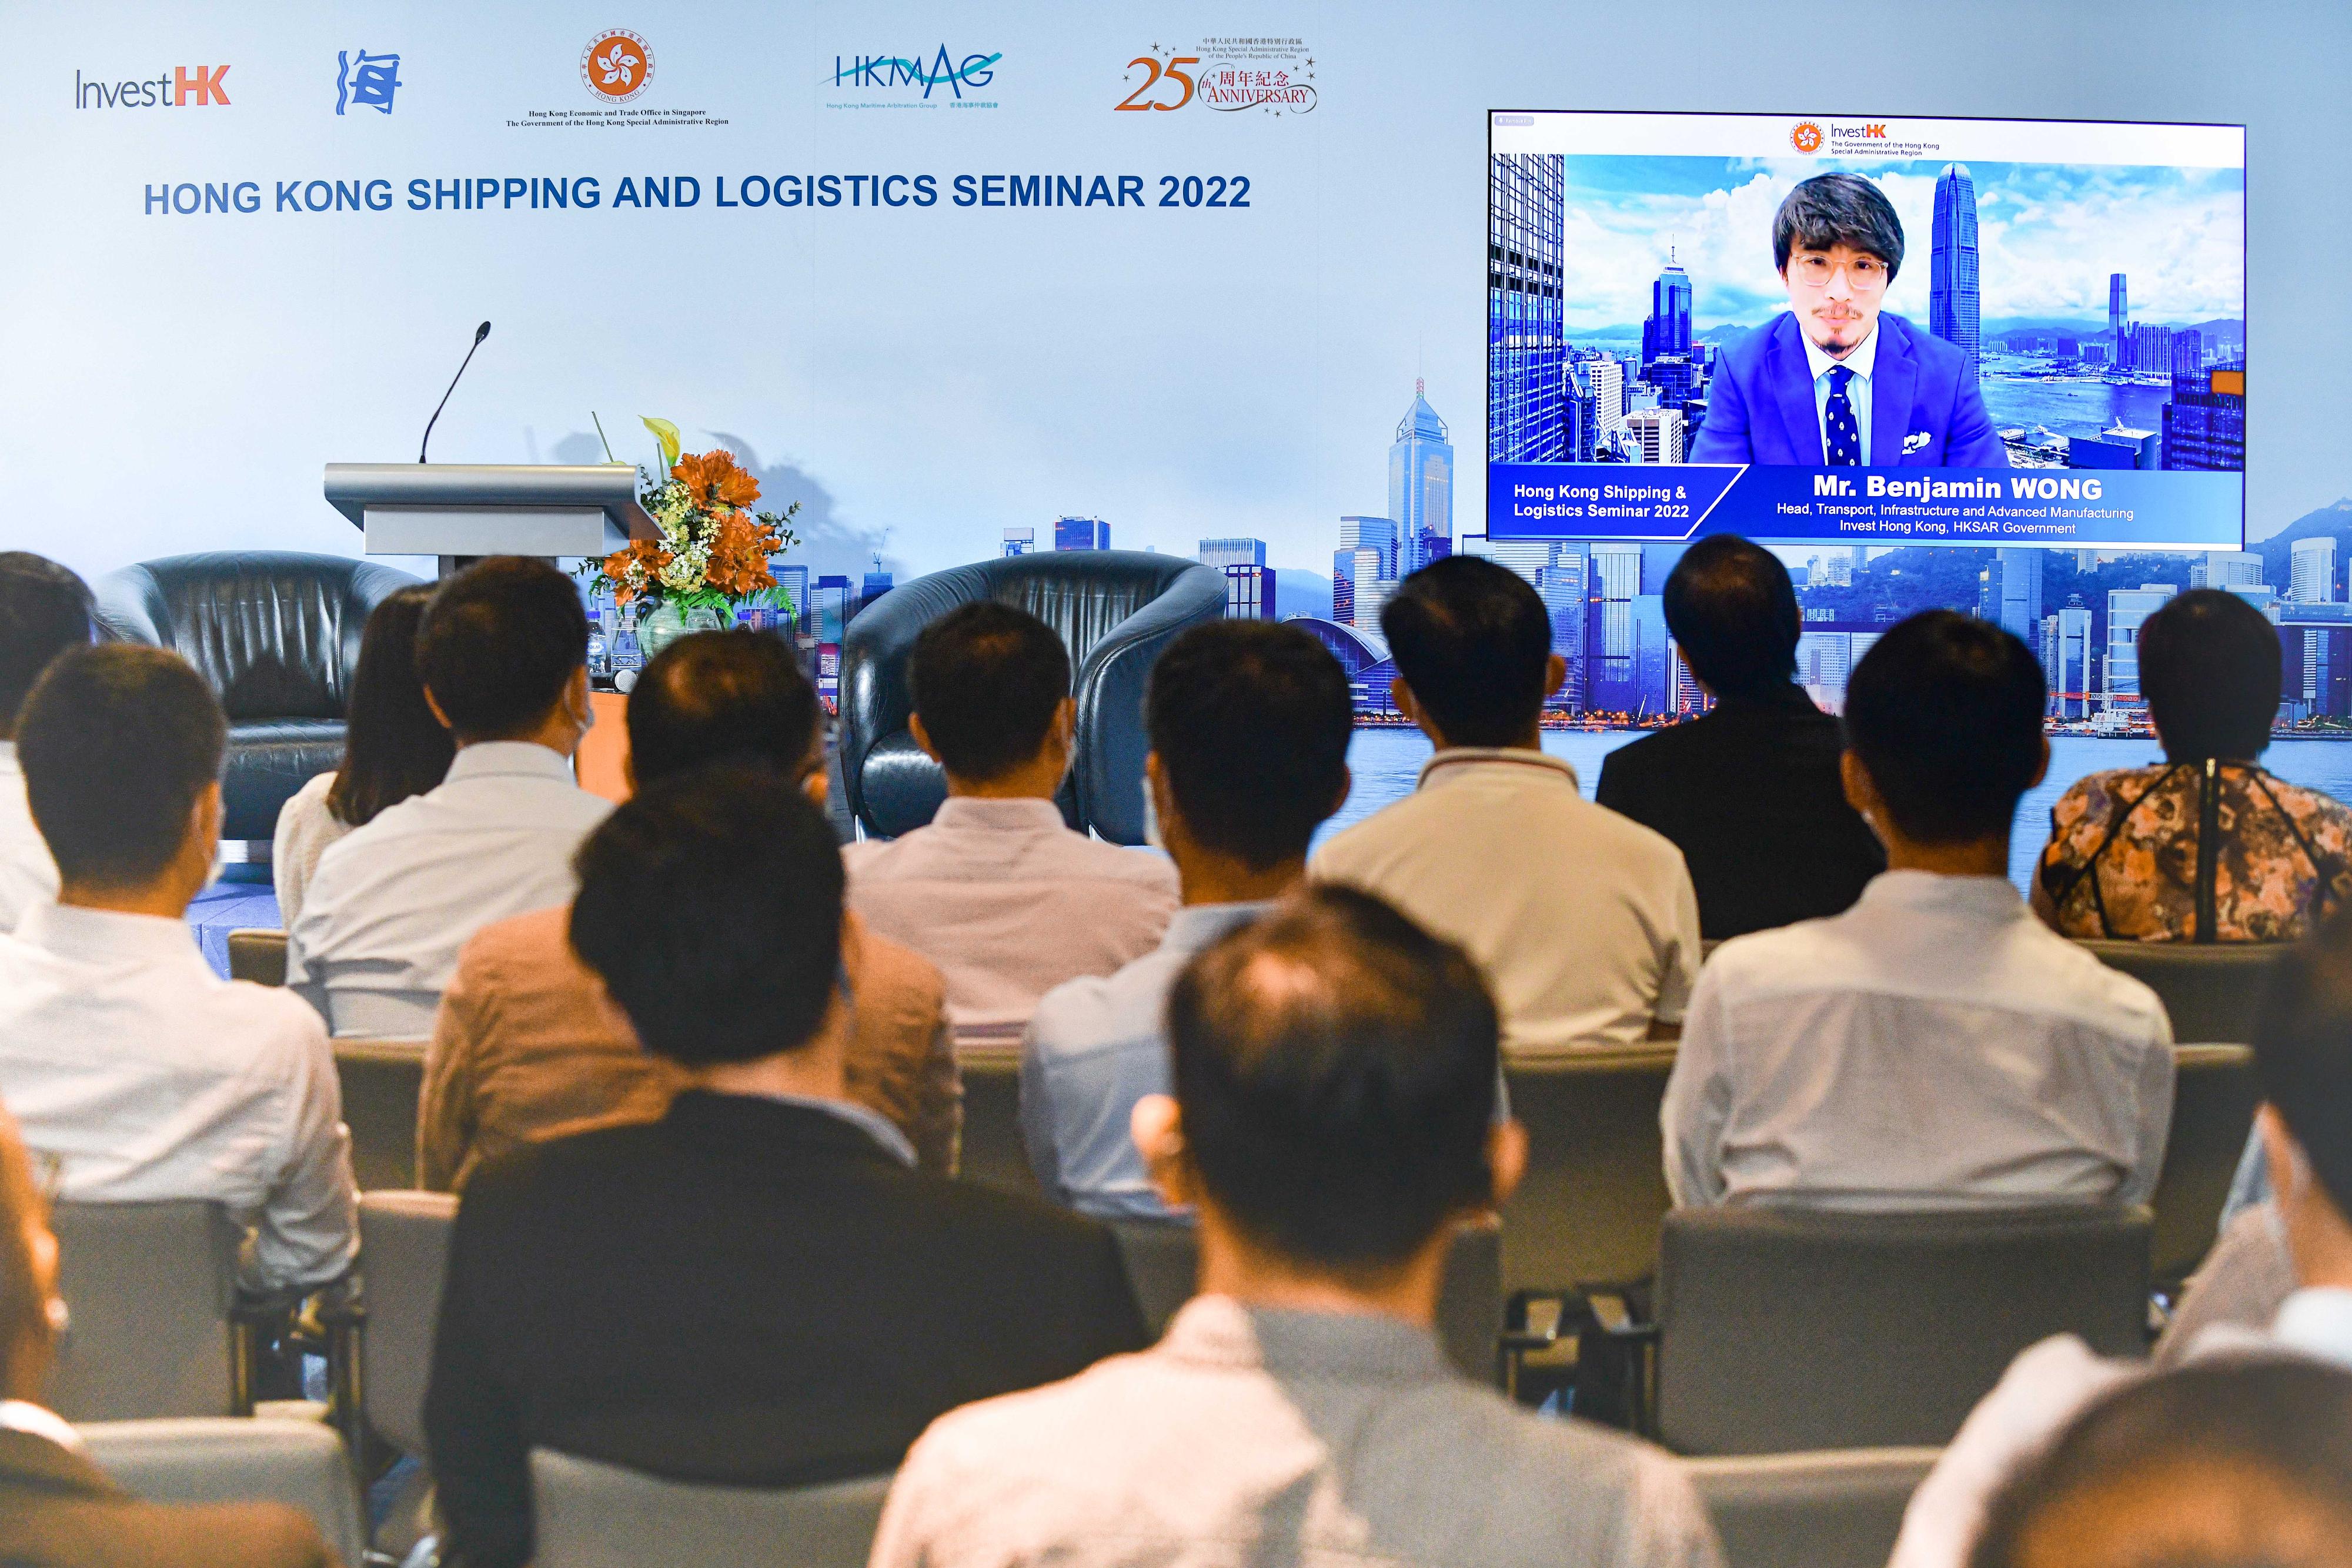 The Hong Kong Economic and Trade Office in Singapore held a business seminar today (August 18) entitled "Development of Hong Kong Shipping Registry and logistics opportunities associated with Greater Bay Area" to celebrate the 25th anniversary of the establishment of the Hong Kong Special Administrative Region. Photo shows the Head (Transport, Infrastructure and Advanced Manufacturing) of Invest Hong Kong, Mr Benjamin Wong, giving a presentation on opportunities offered by Hong Kong's shipping and logistics sectors for businesses in the Association of Southeast Asian Nations.